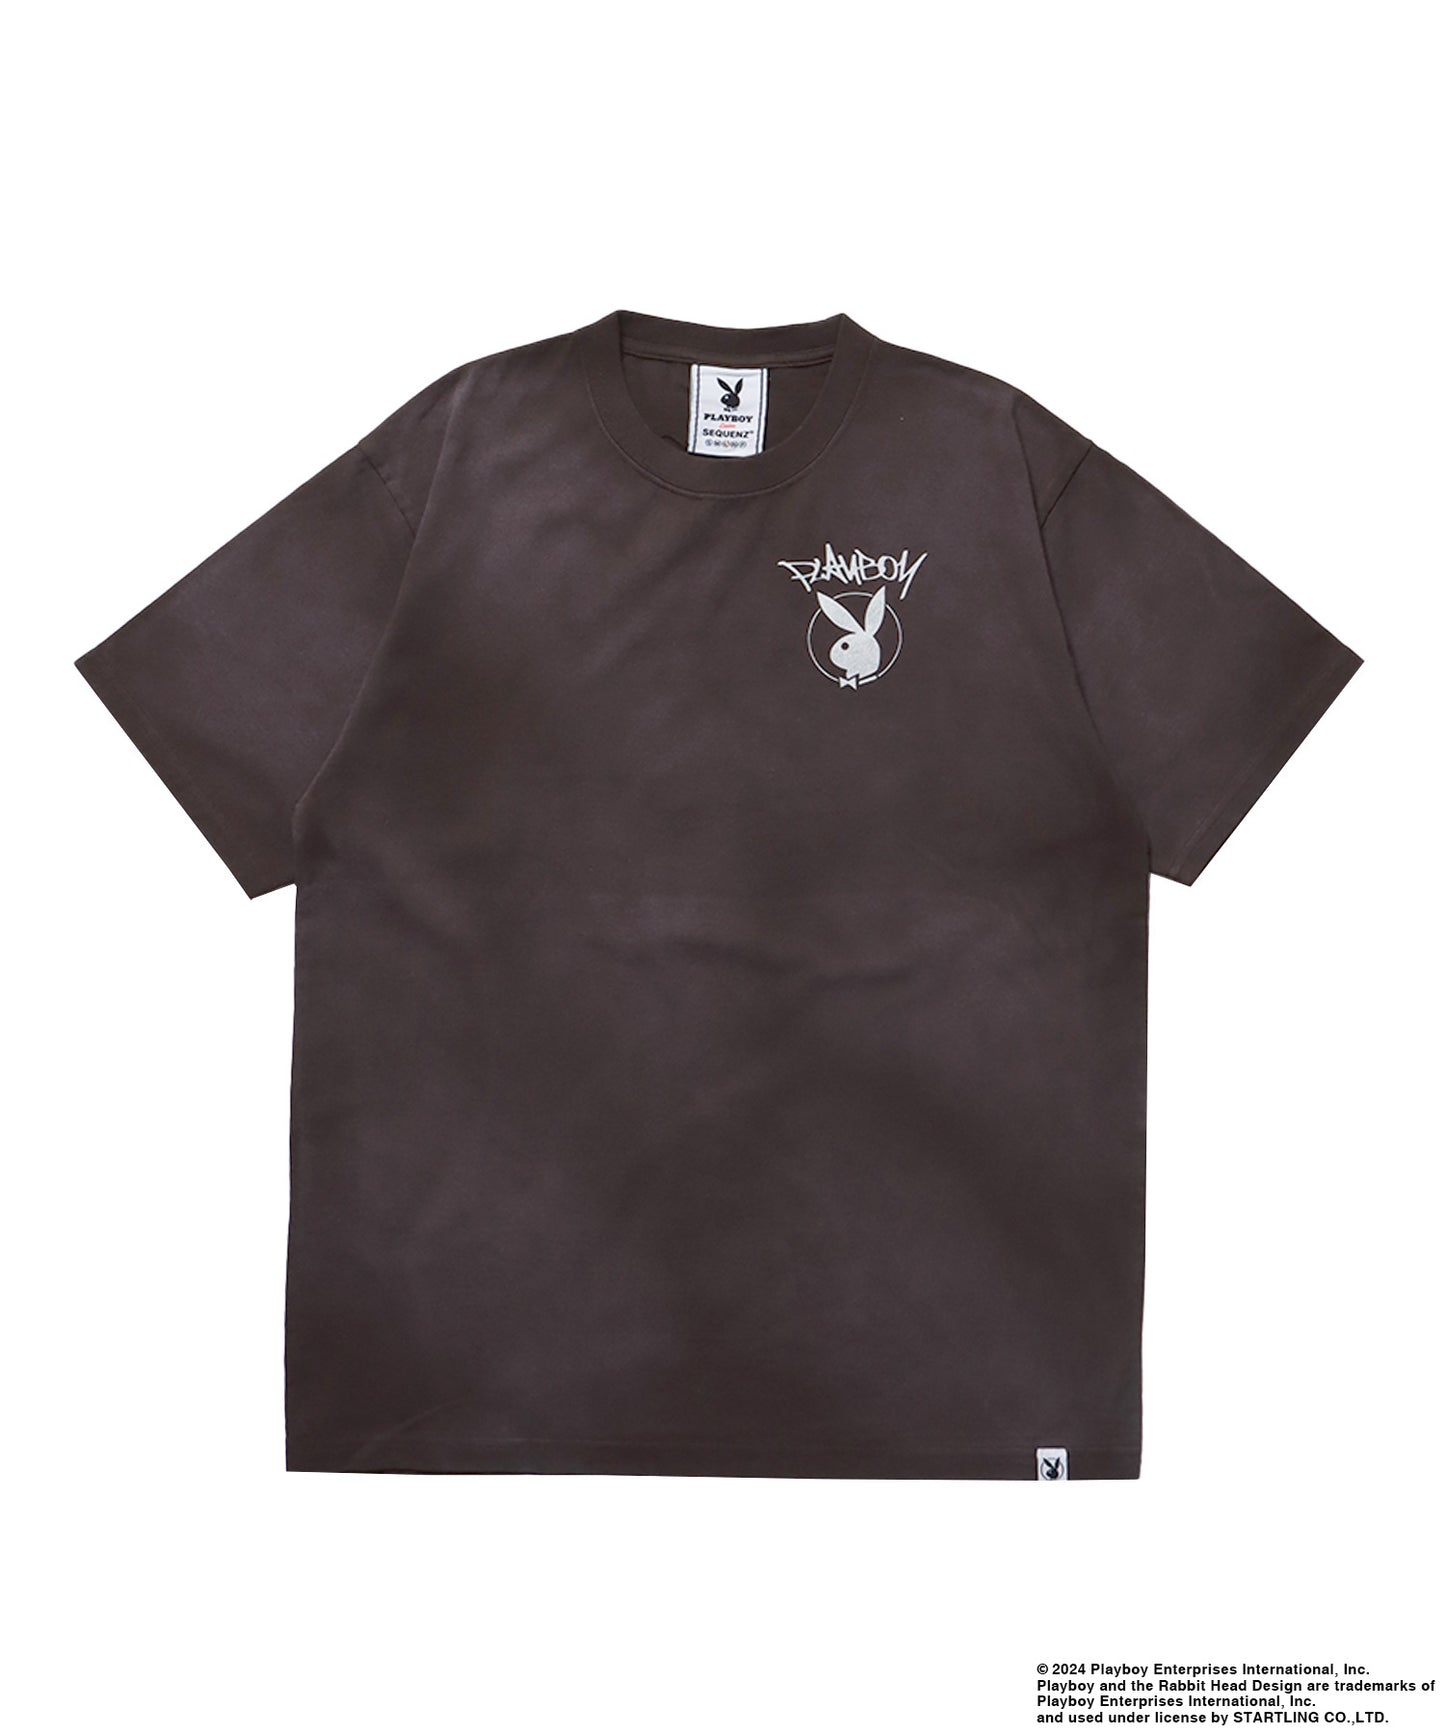 PB O.G LOGO FADE S/S TEE / PLAYBOY×Sequenz フェード加工 90s ヴィンテージ Tシャツ グラフィティ プリント 半袖 ダークブラウン